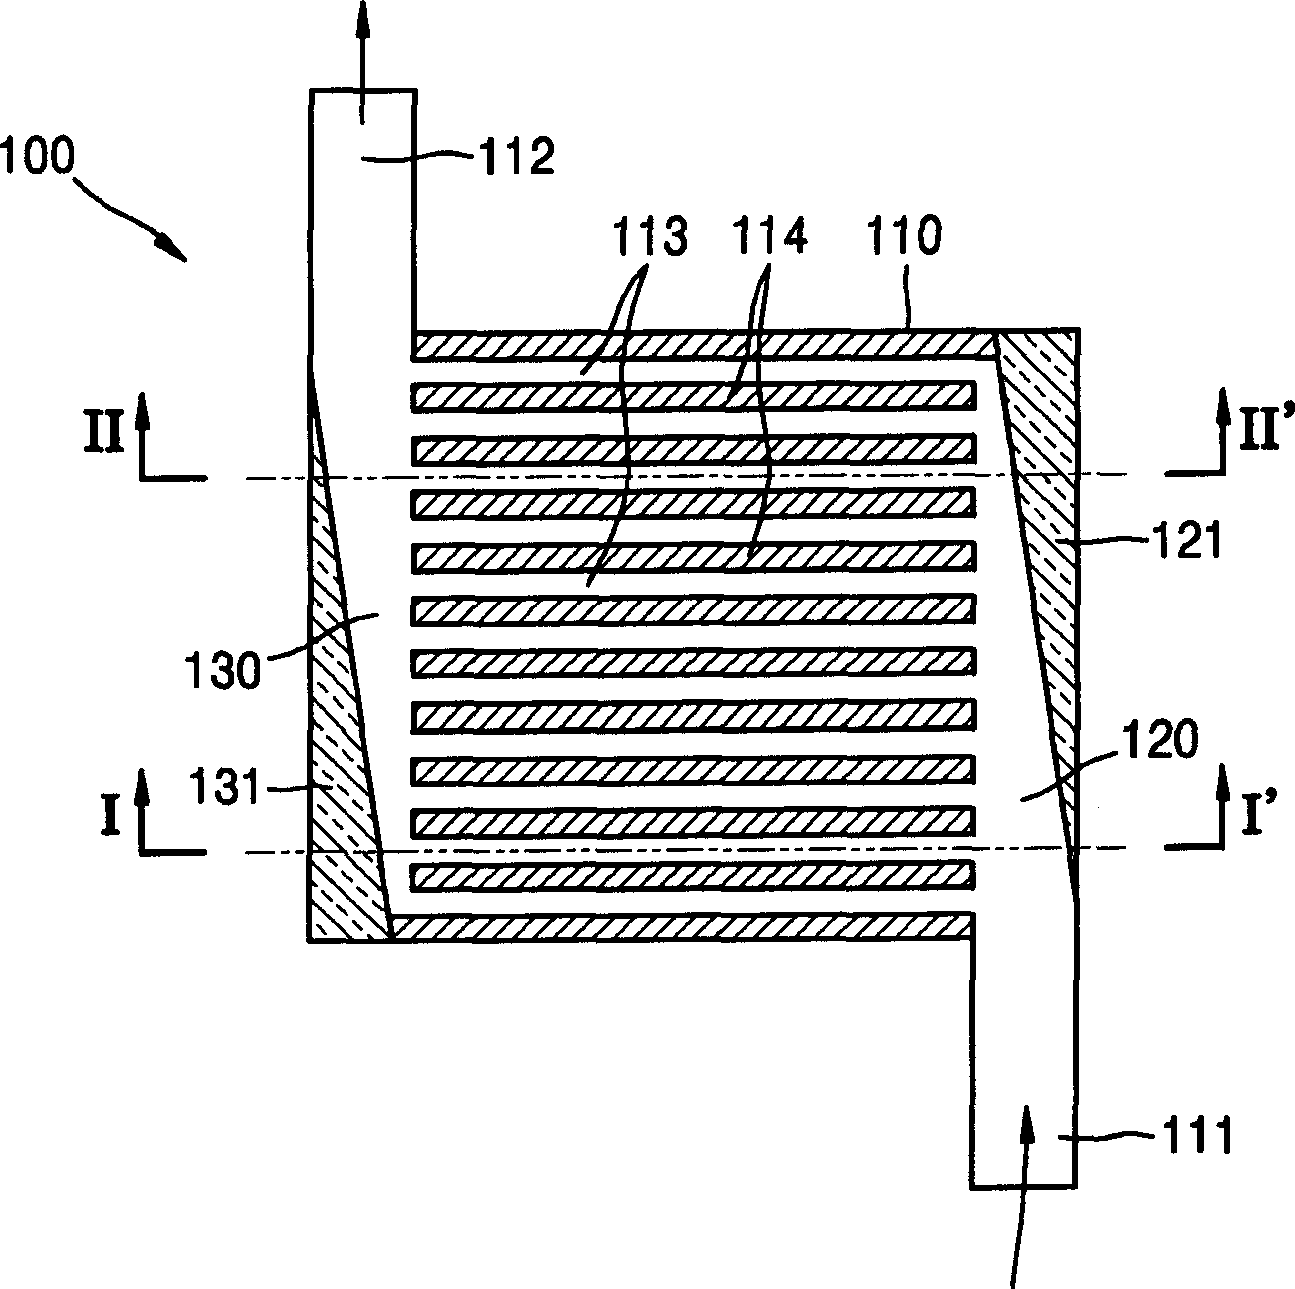 Heat sink apparatus for electronic device